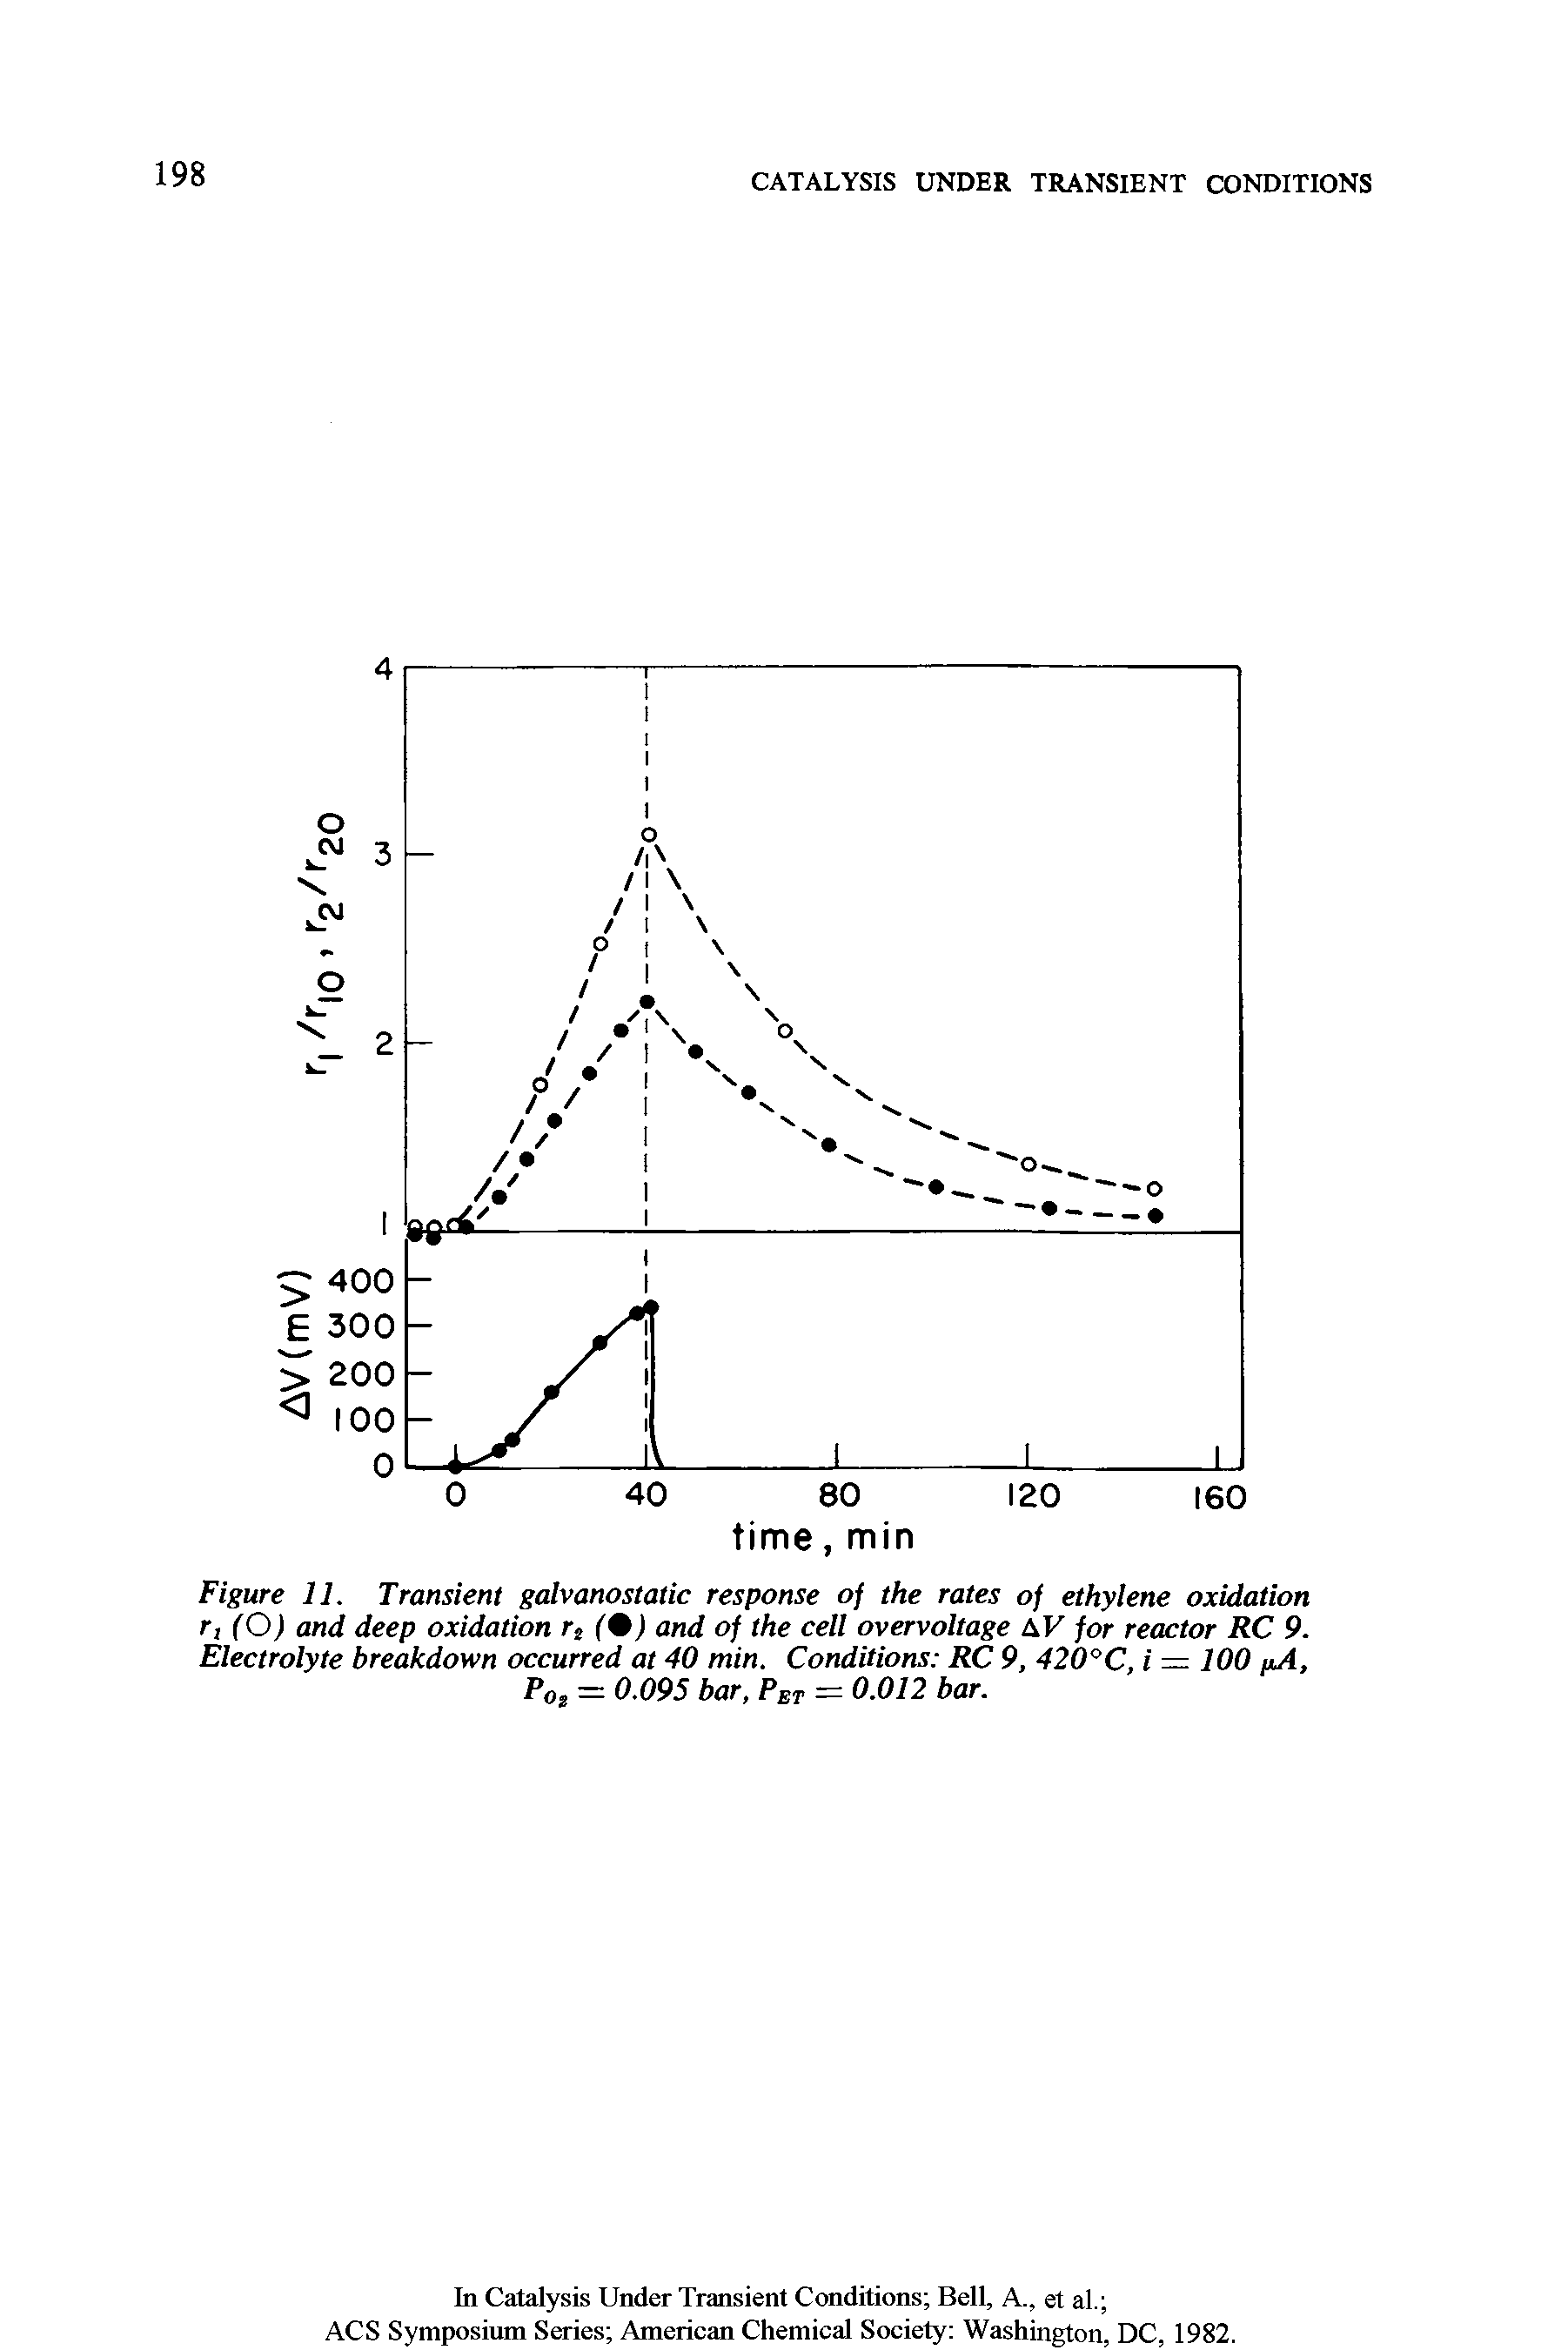 Figure 11. Transient galvanostatic response of the rates of ethylene oxidation r, (O) and deep oxidation rt (0) and of the cell overvoltage AV for reactor RC 9. Electrolyte breakdown occurred at 40 min. Conditions RC 9, 420°C, i — 100 pA, P0l = 0.095 bar, PET = 0.012 bar.